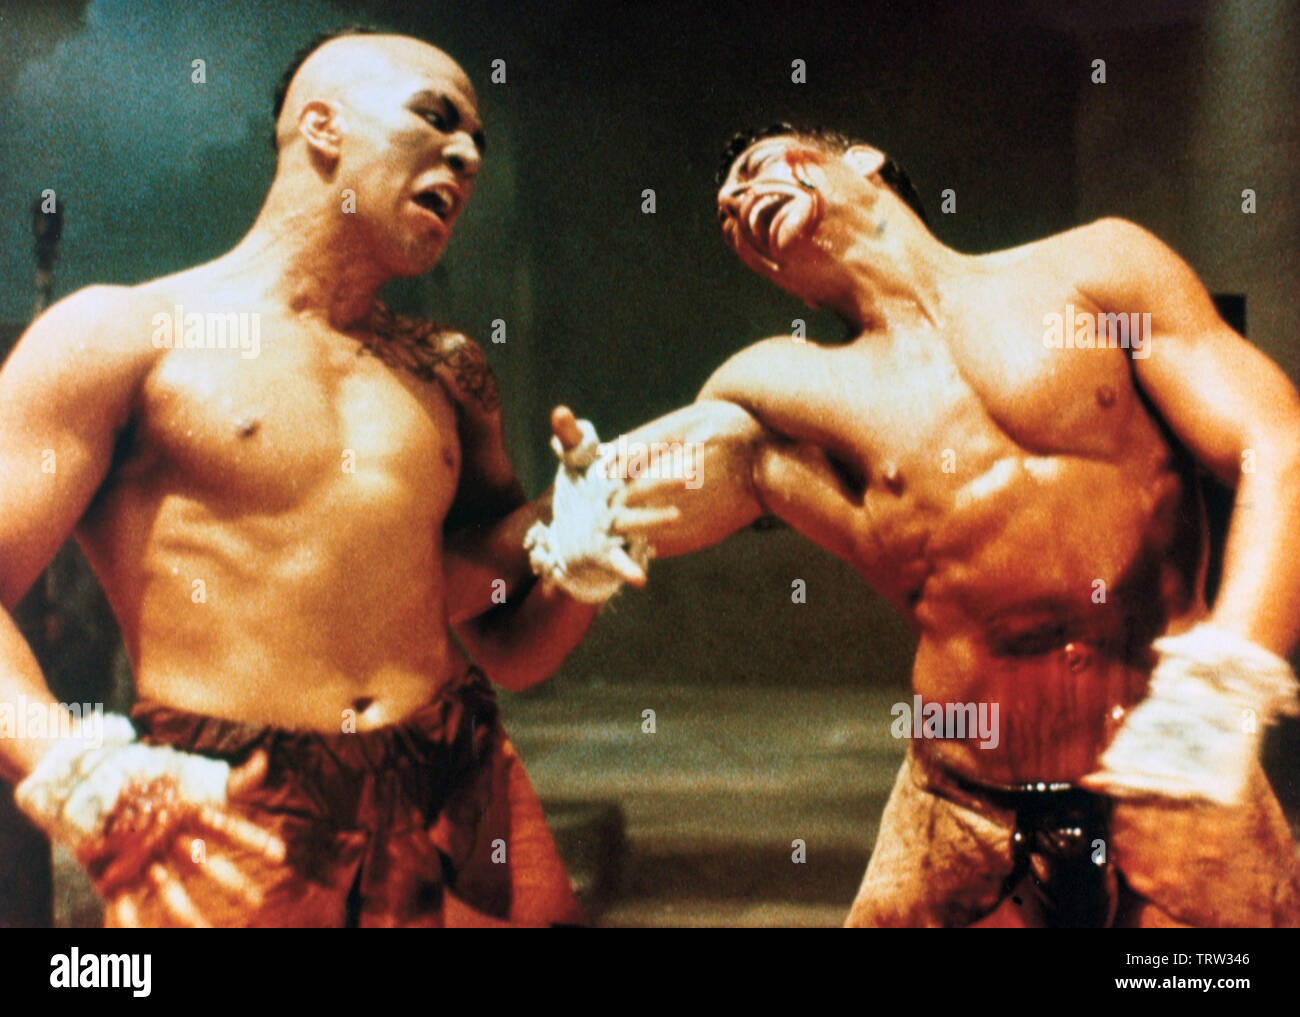 JEAN-CLAUDE VAN DAMME in KICKBOXER (1989). Copyright: Editorial use only.  No merchandising or book covers. This is a publicly distributed handout.  Access rights only, no license of copyright provided. Only to be